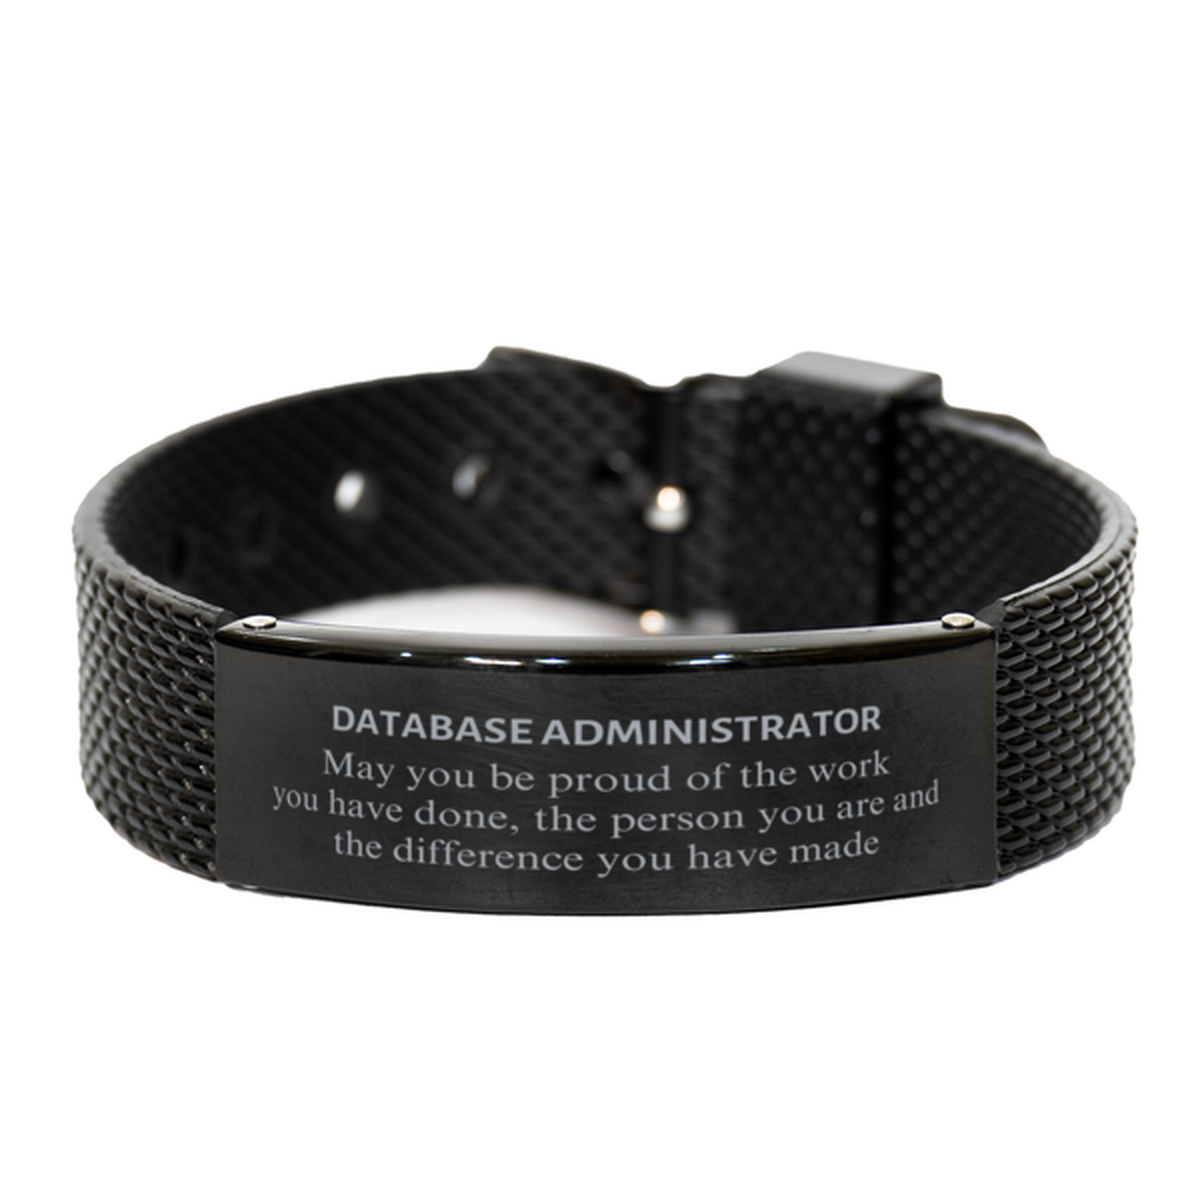 Database Administrator May you be proud of the work you have done, Retirement Database Administrator Black Shark Mesh Bracelet for Colleague Appreciation Gifts Amazing for Database Administrator